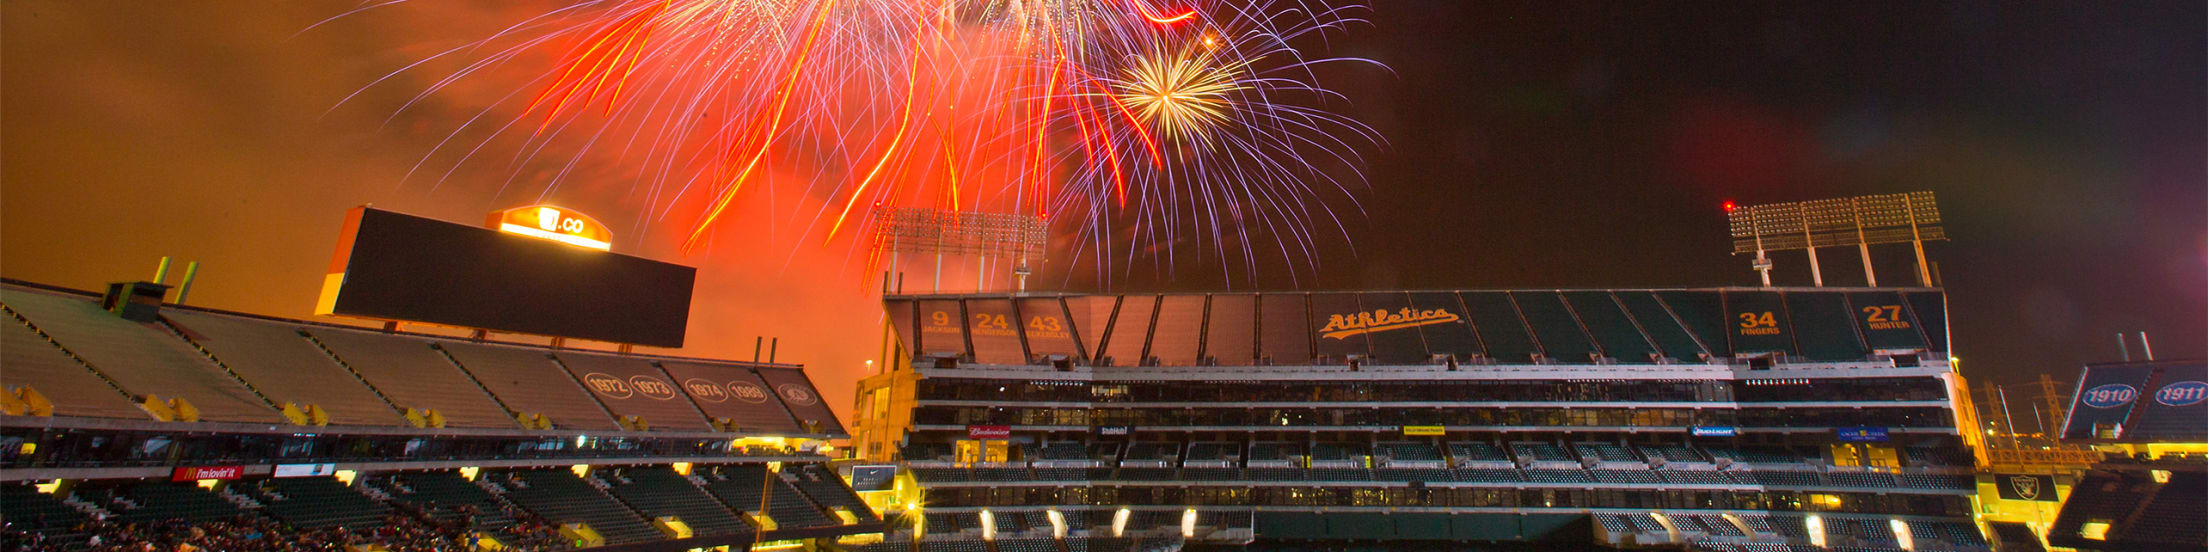 Spikes, Fireworks and Dessert: An explosive ending in Anaheim